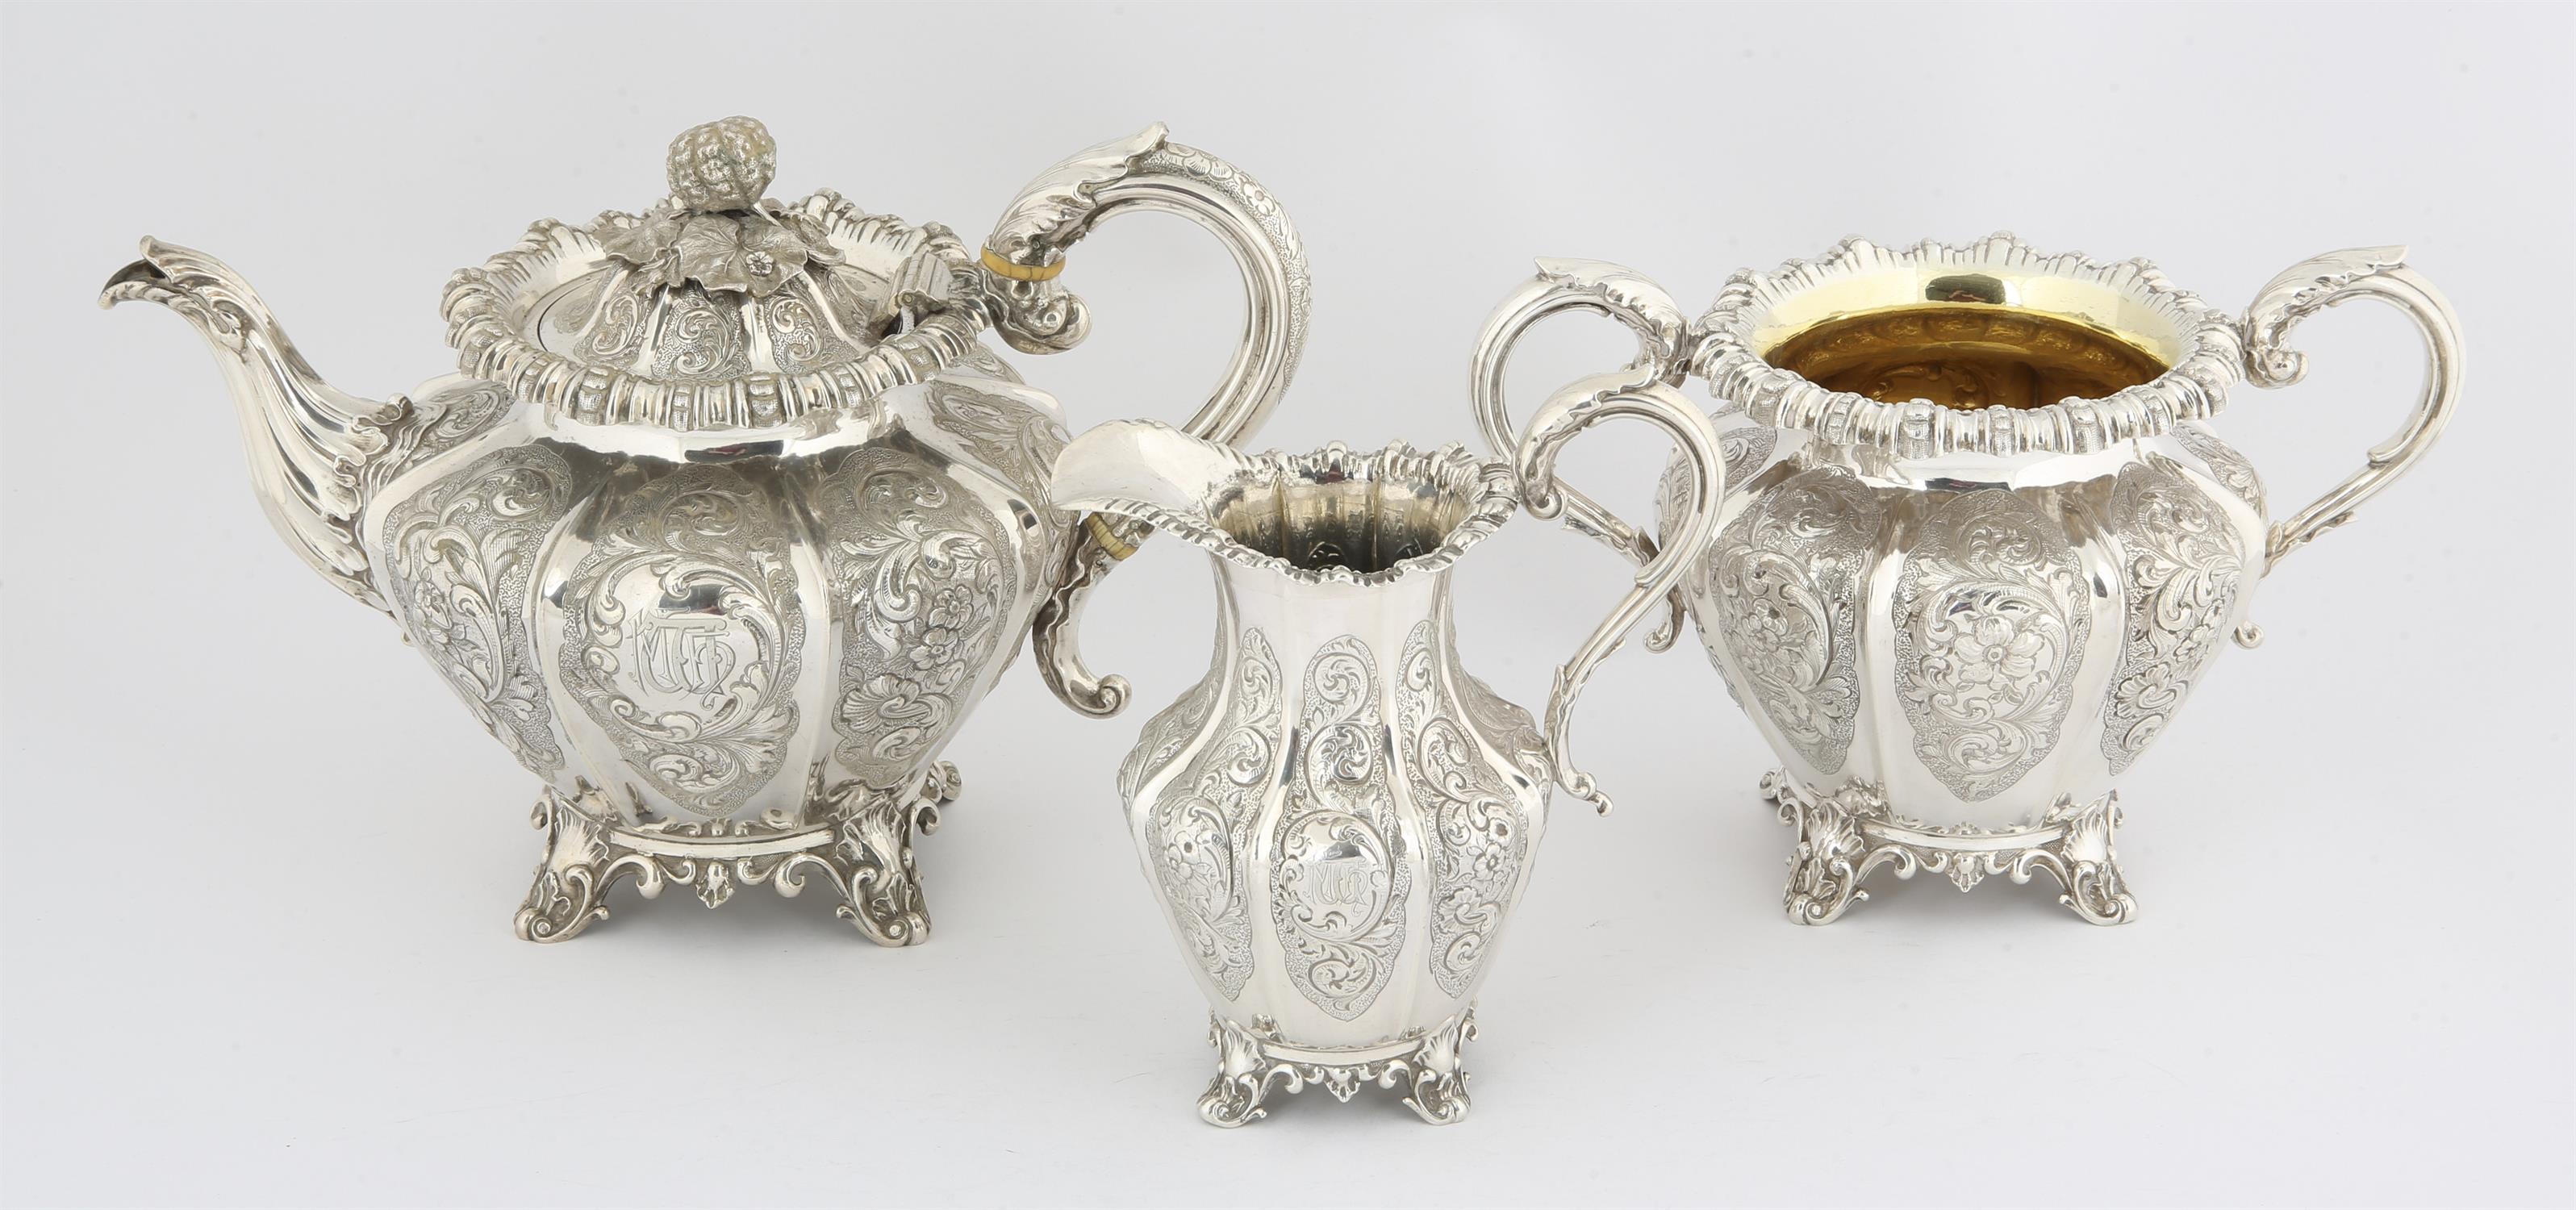 Victorian silver good quality three piece tea service decorated with embossed panels of flowers and - Image 2 of 6